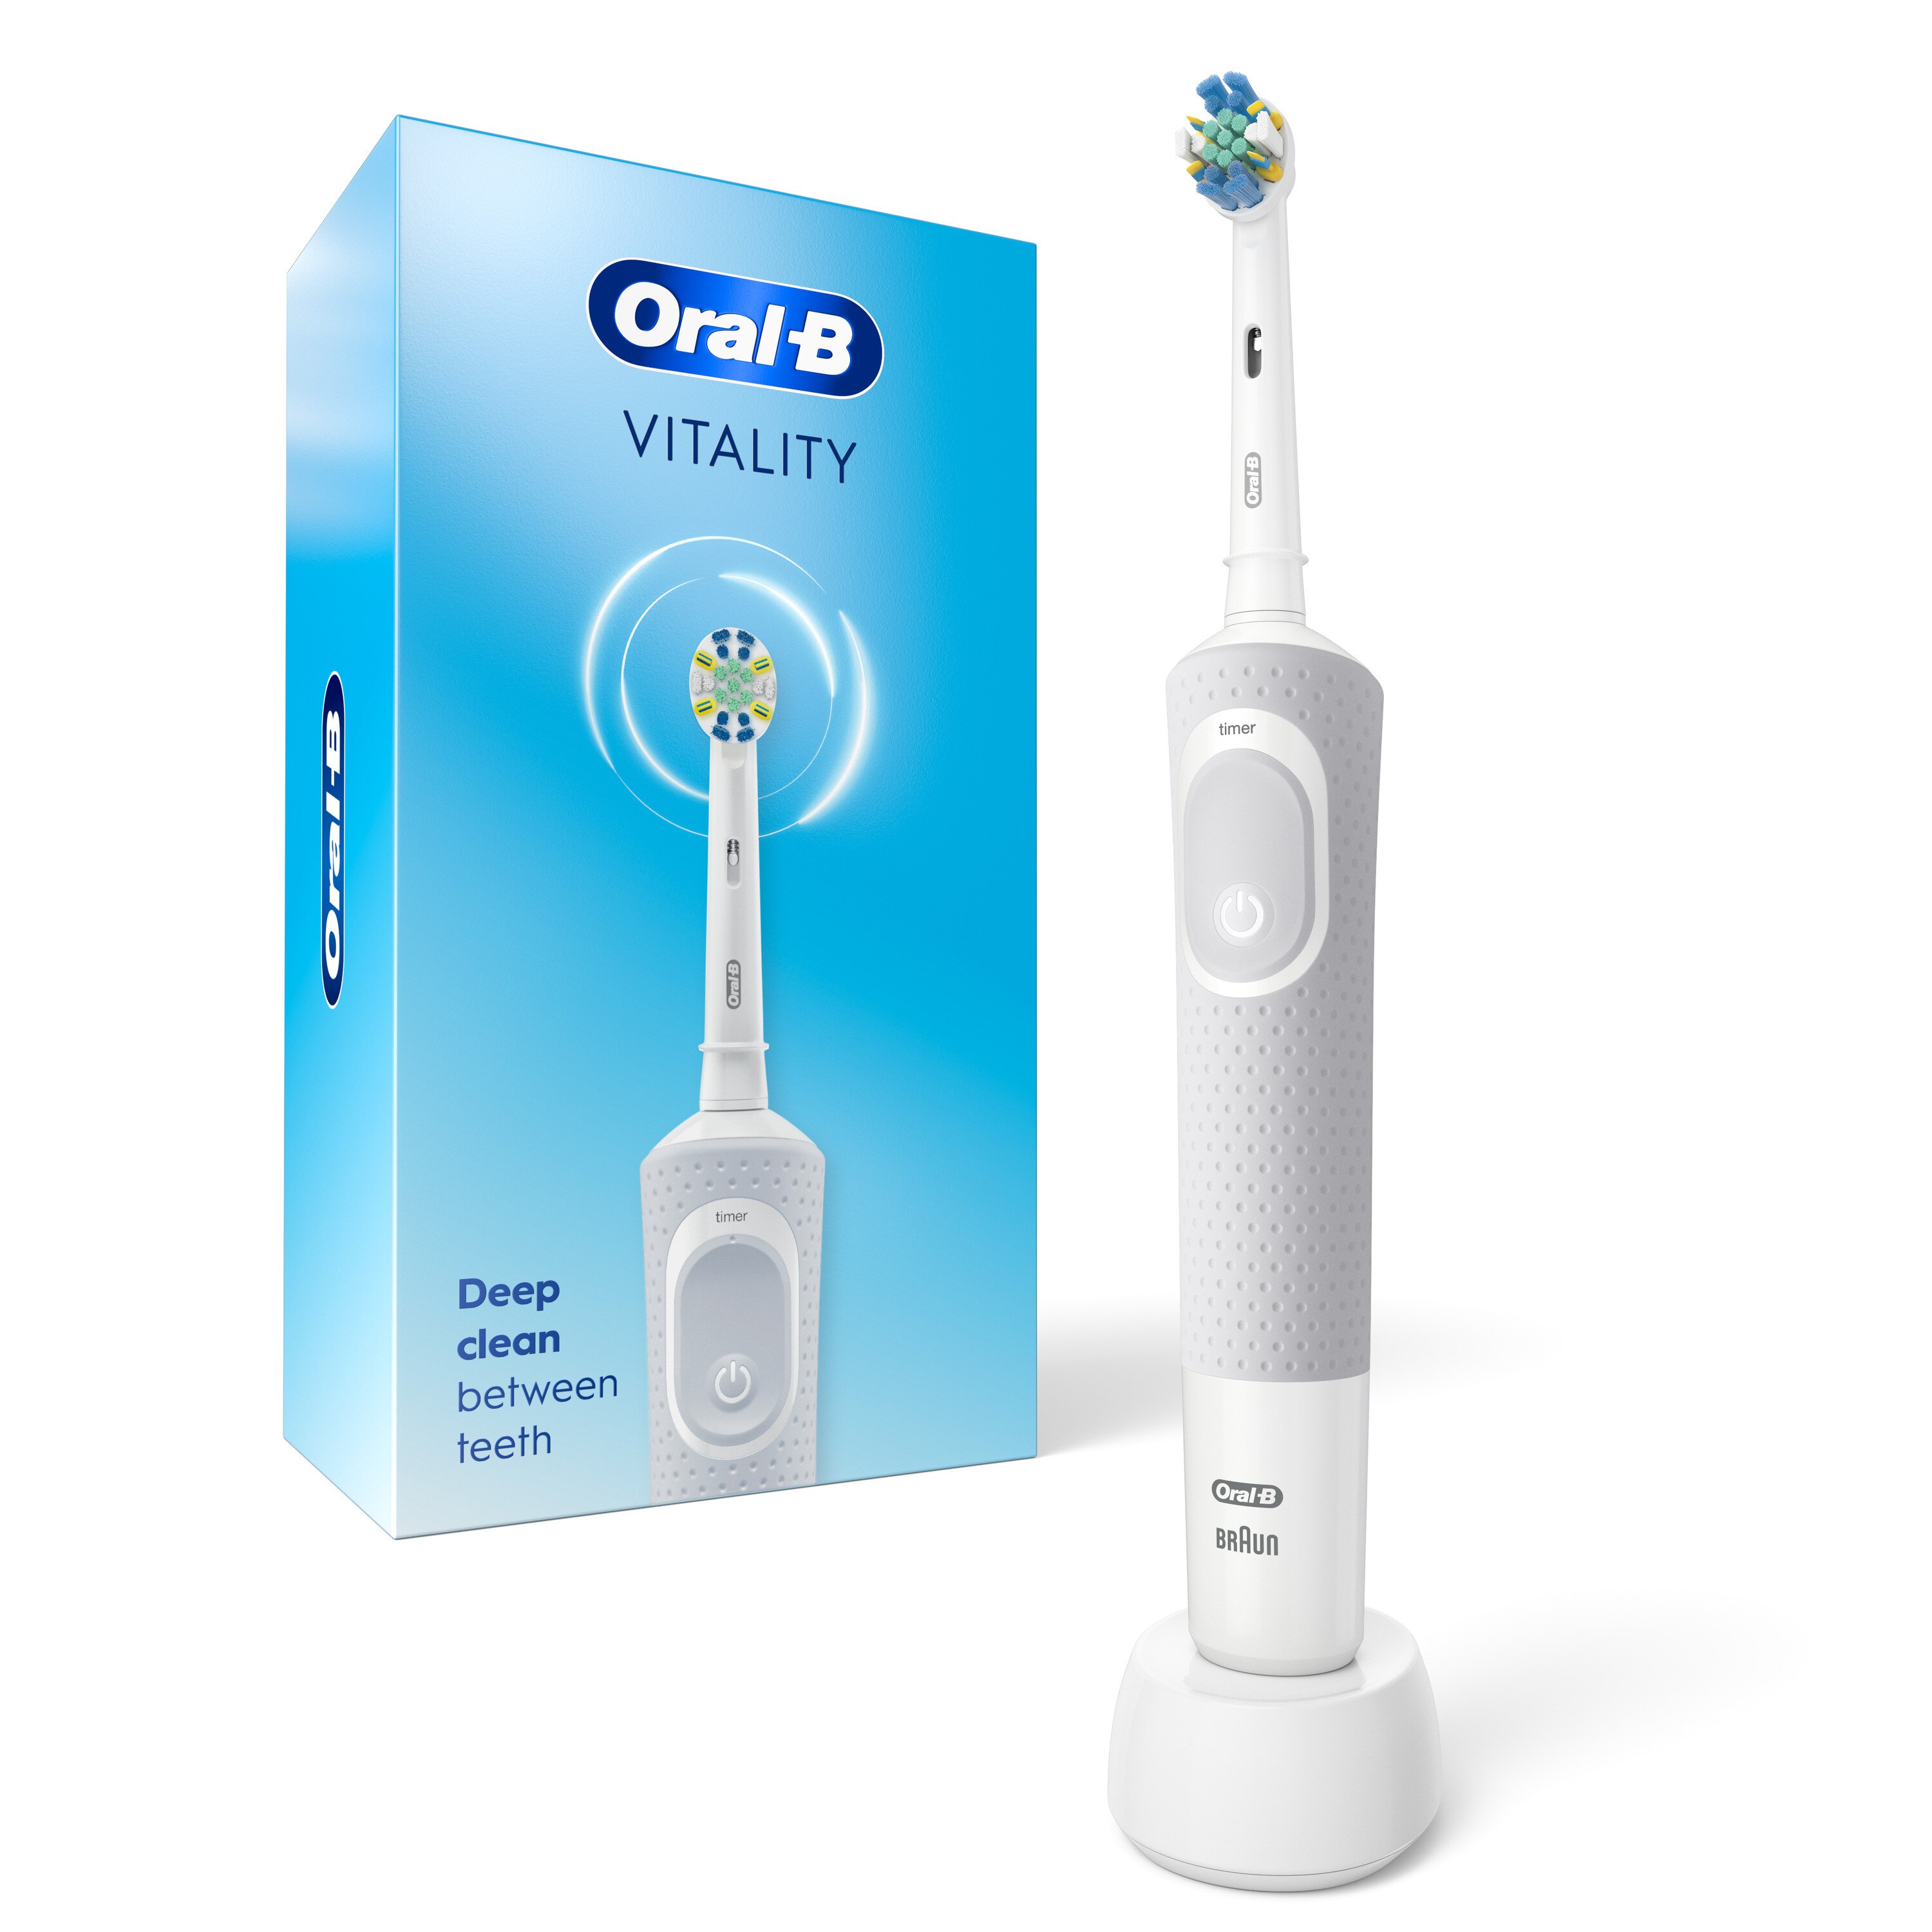 Oral-B Vitality FlossAction Electric Rechargeable Toothbrush, by Braun | Pick In Store TODAY at CVS